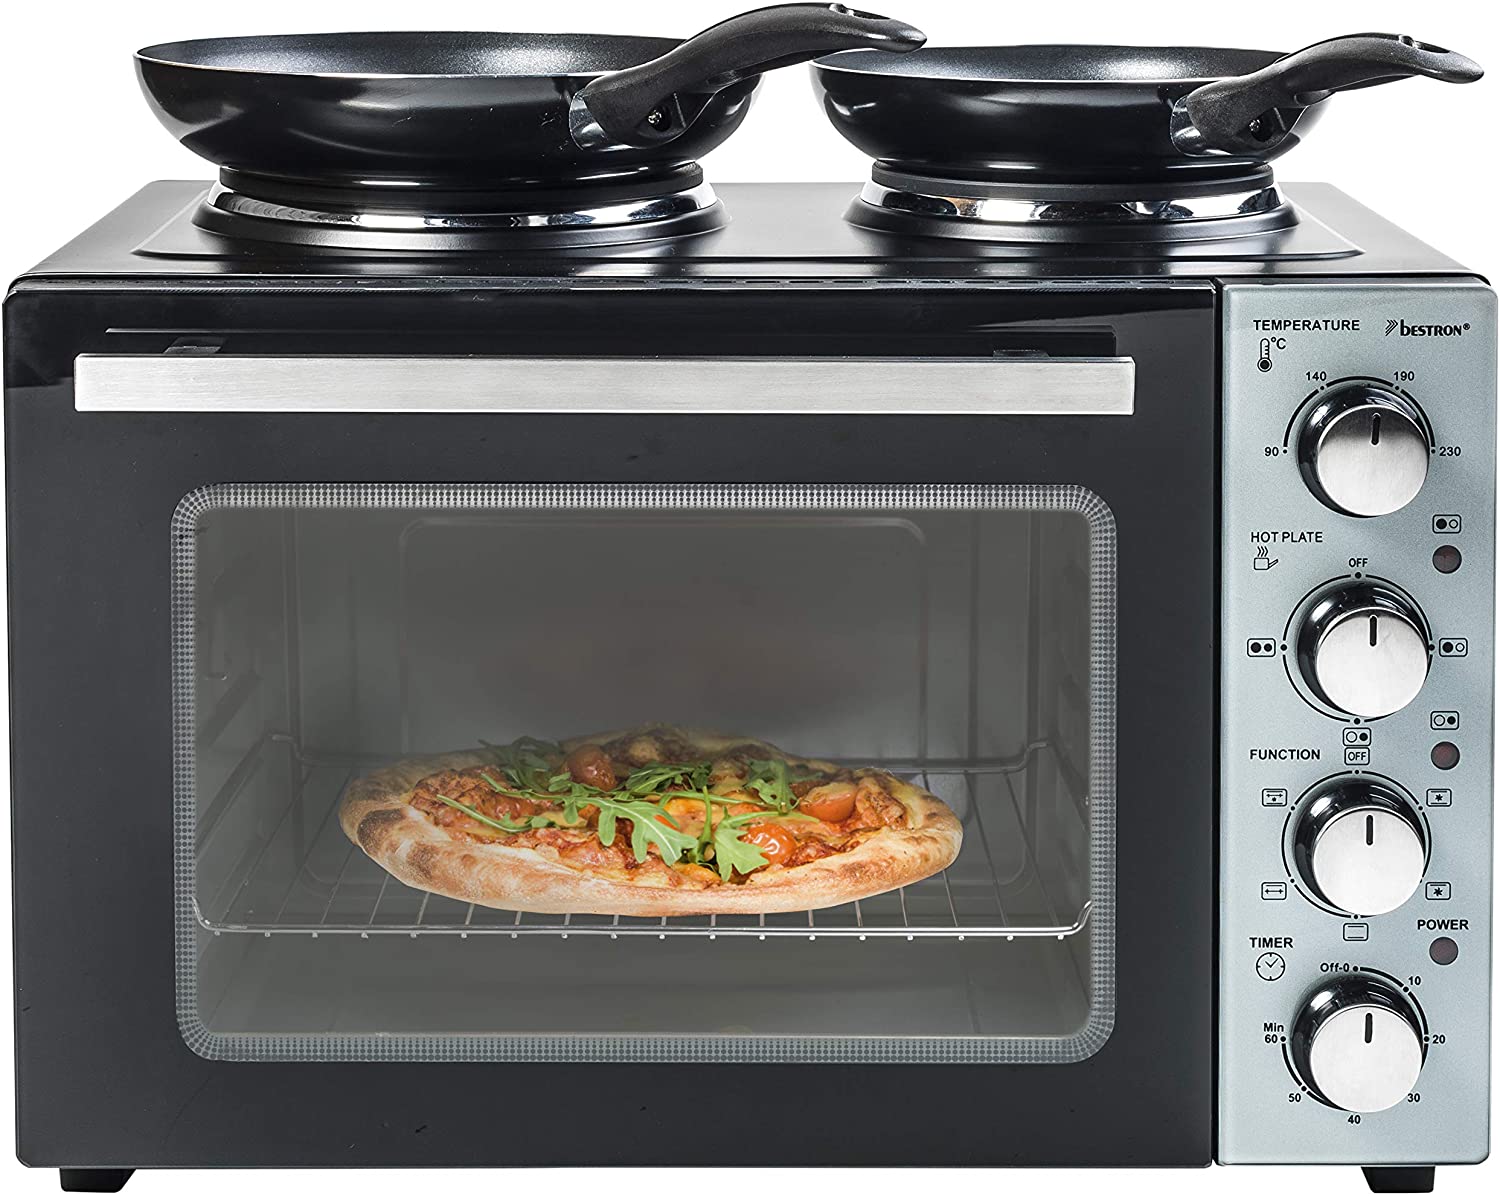 Bestron AOV31CP Small Kitchen, Mini Oven with Double Hot Plate, Top/Bottom Heat with Recirculation Function up to 230°C, 3200 Watt, Black